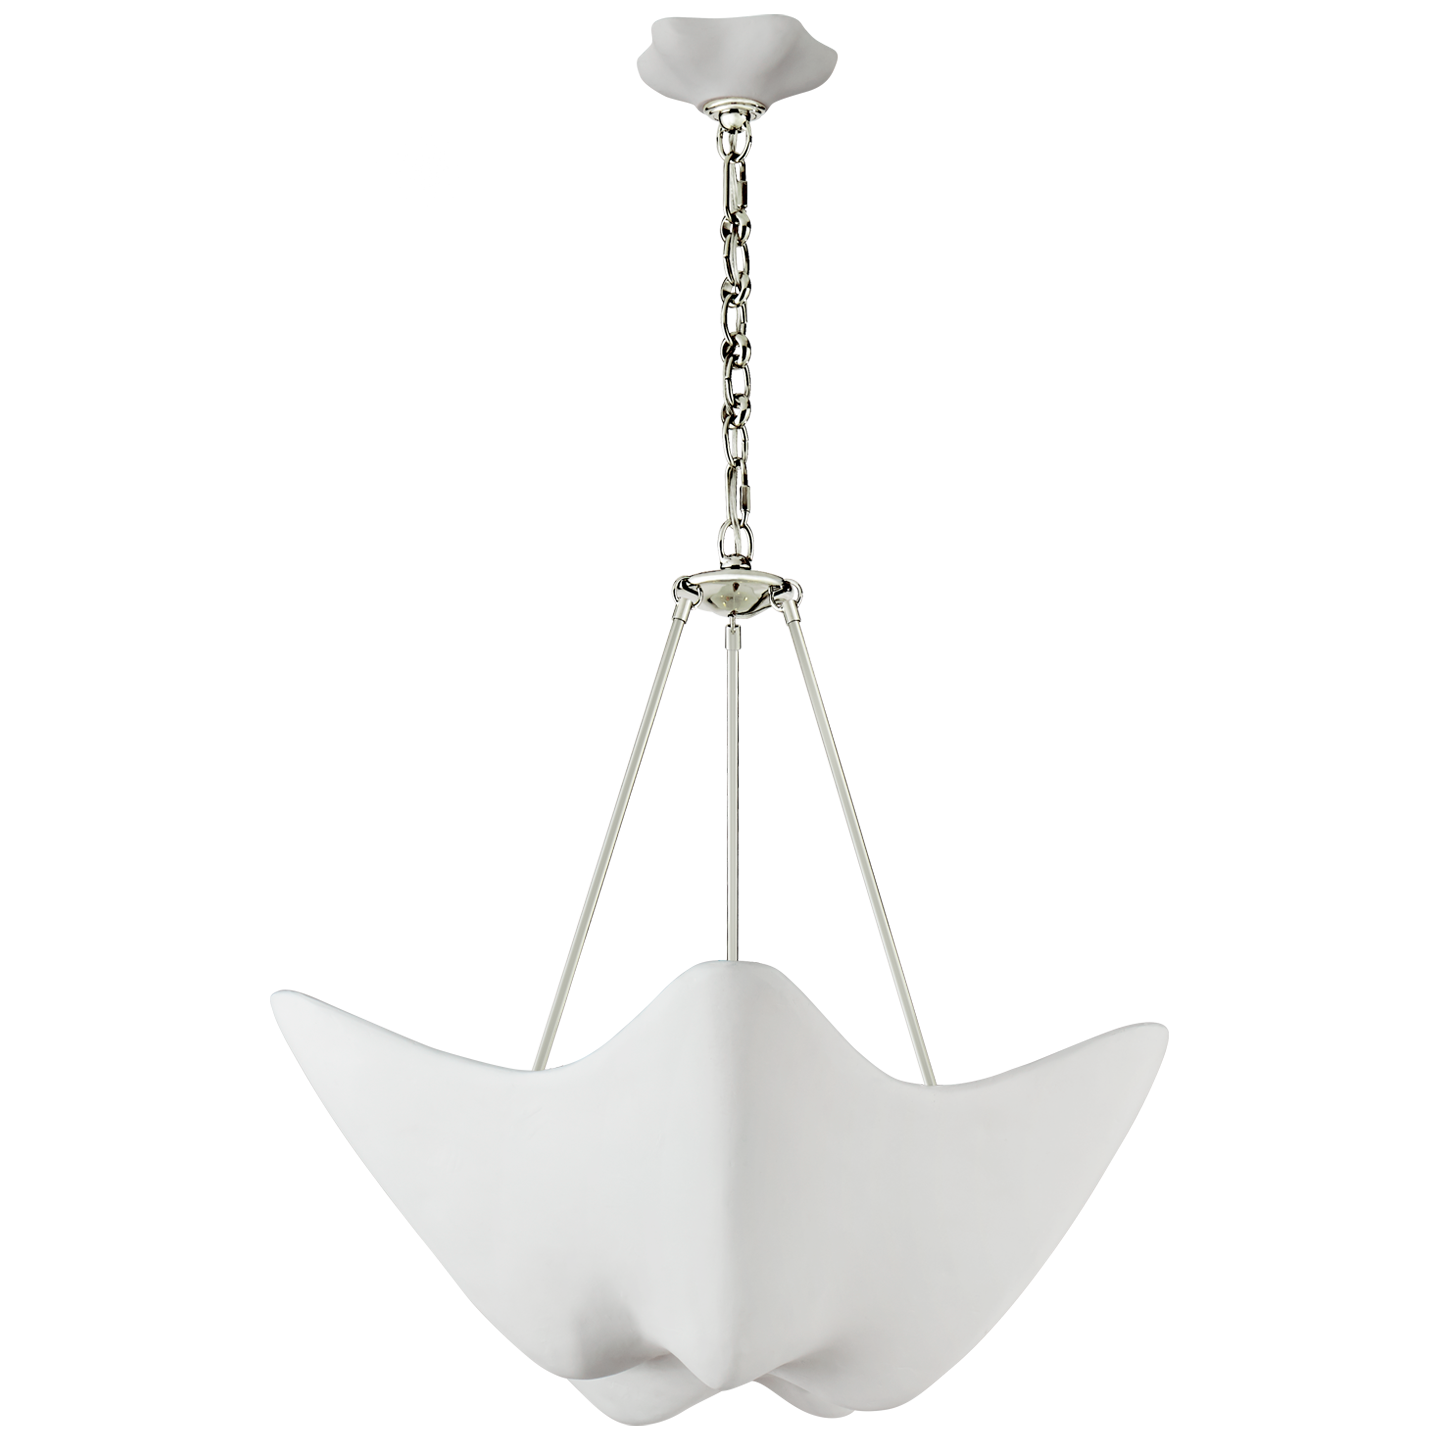 The Cosima Medium Chandelier has a unique, abstract shape. Hang in your bedroom, over the kitchen island, or another area to bring some fun light to the space.   Designer: AERIN  Height: 27.25" Width: 28" Canopy: 6.25" Pentagon Socket: 5 - E12 Candelabra Wattage: 5 - 40 B11